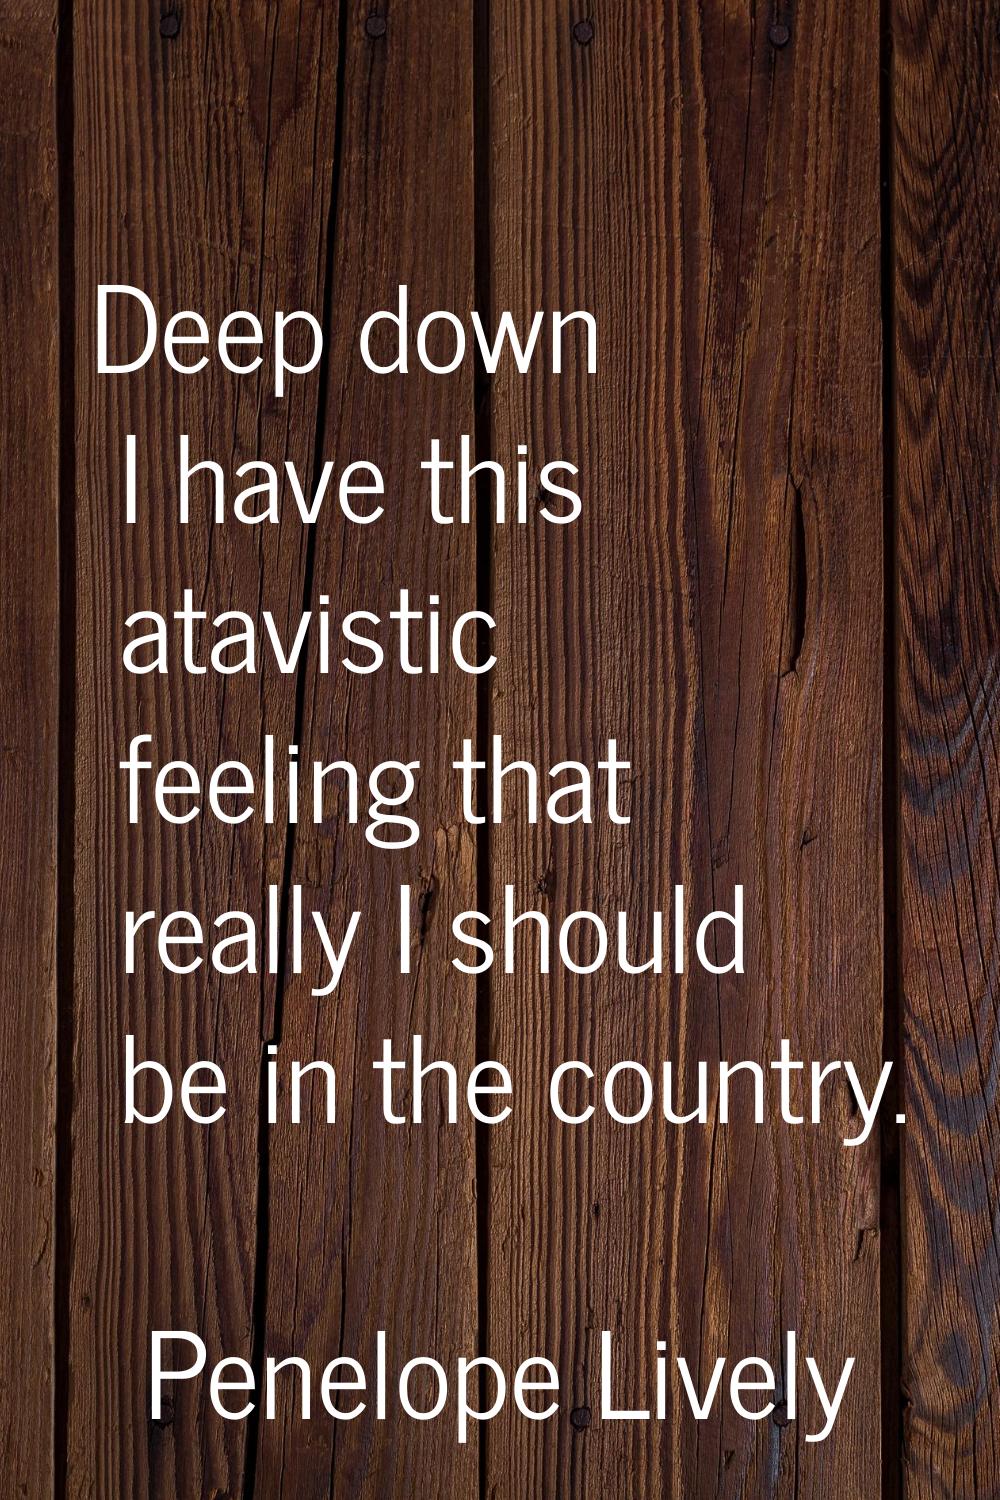 Deep down I have this atavistic feeling that really I should be in the country.